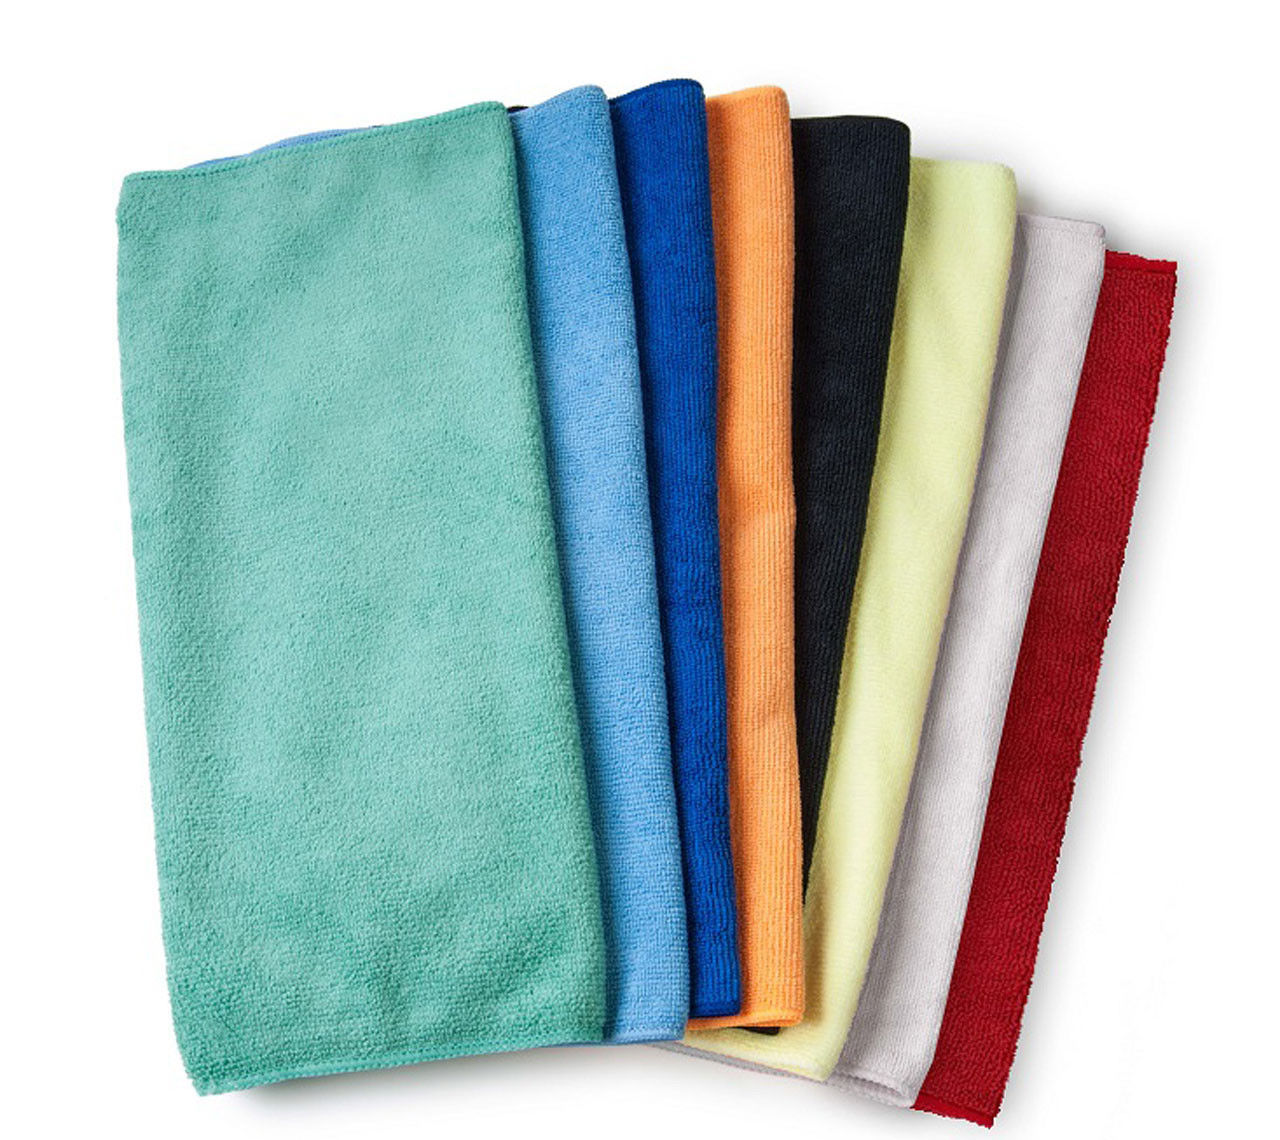 How big are the microfiber golf towels bulk I'm planning to buy?